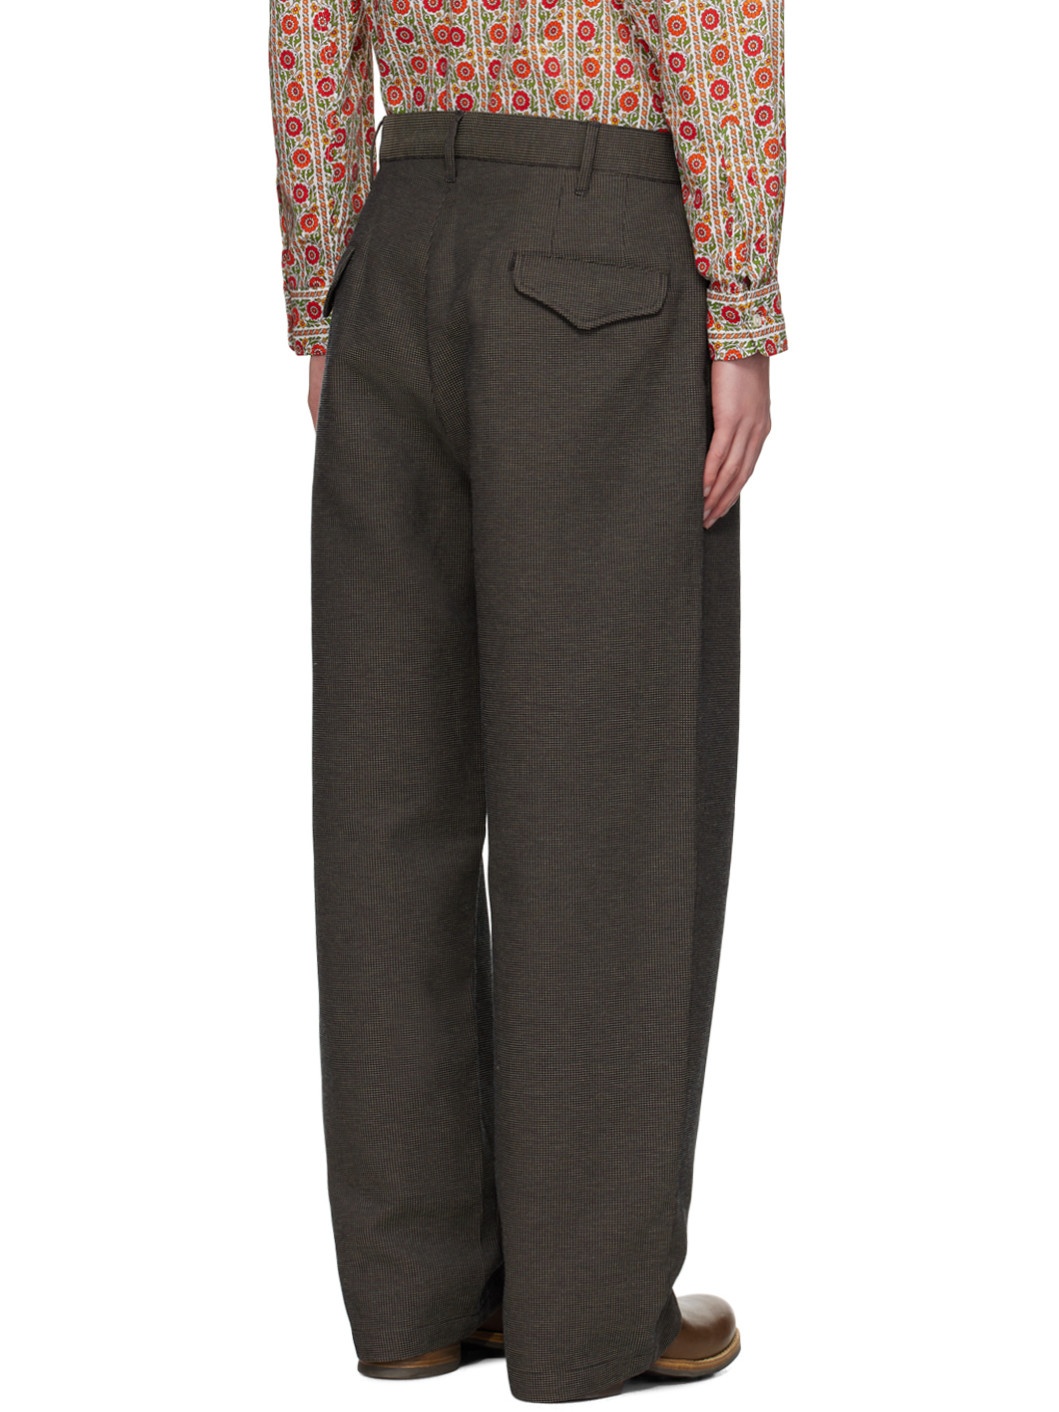 Brown Officer Trousers - 3